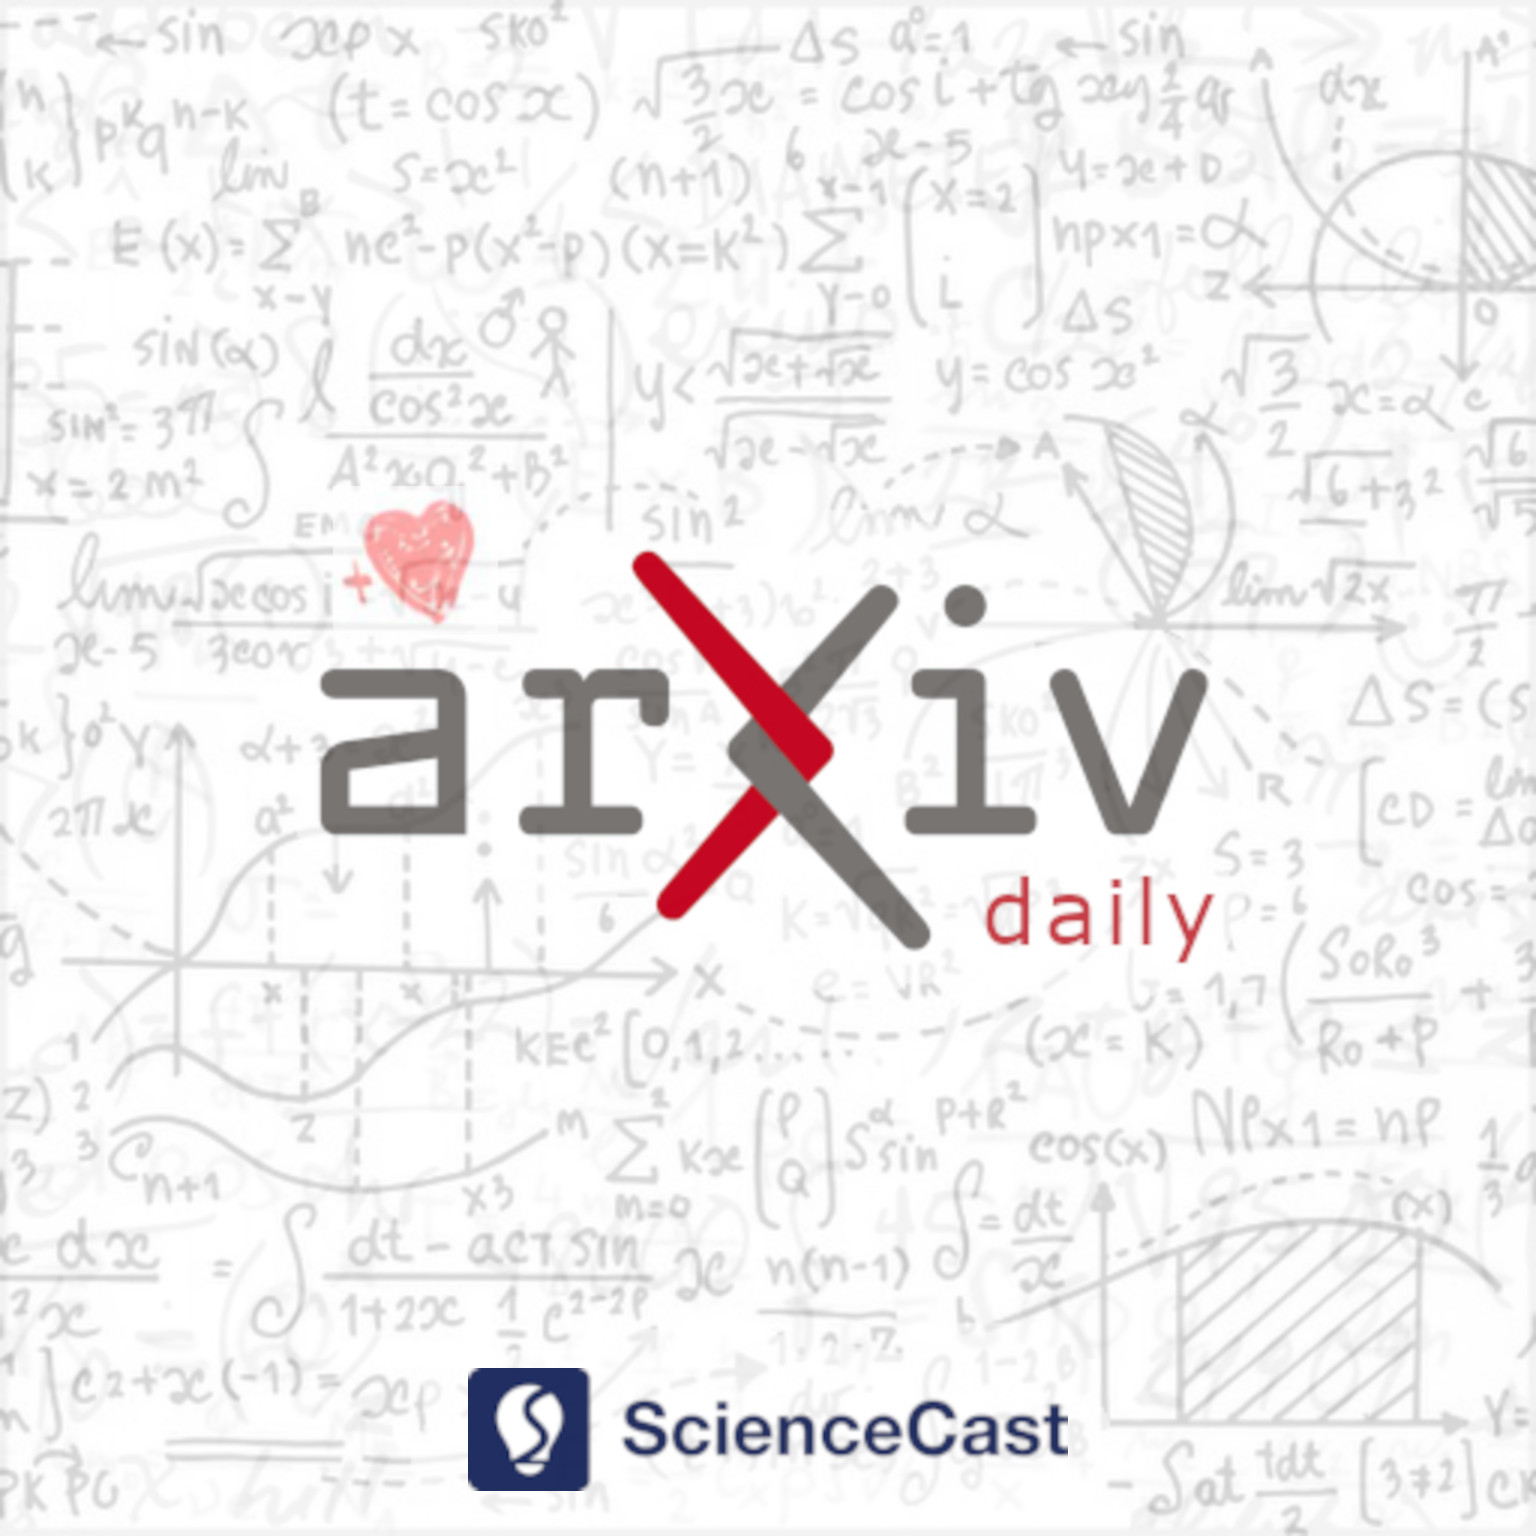 arXiv daily: Software Engineering